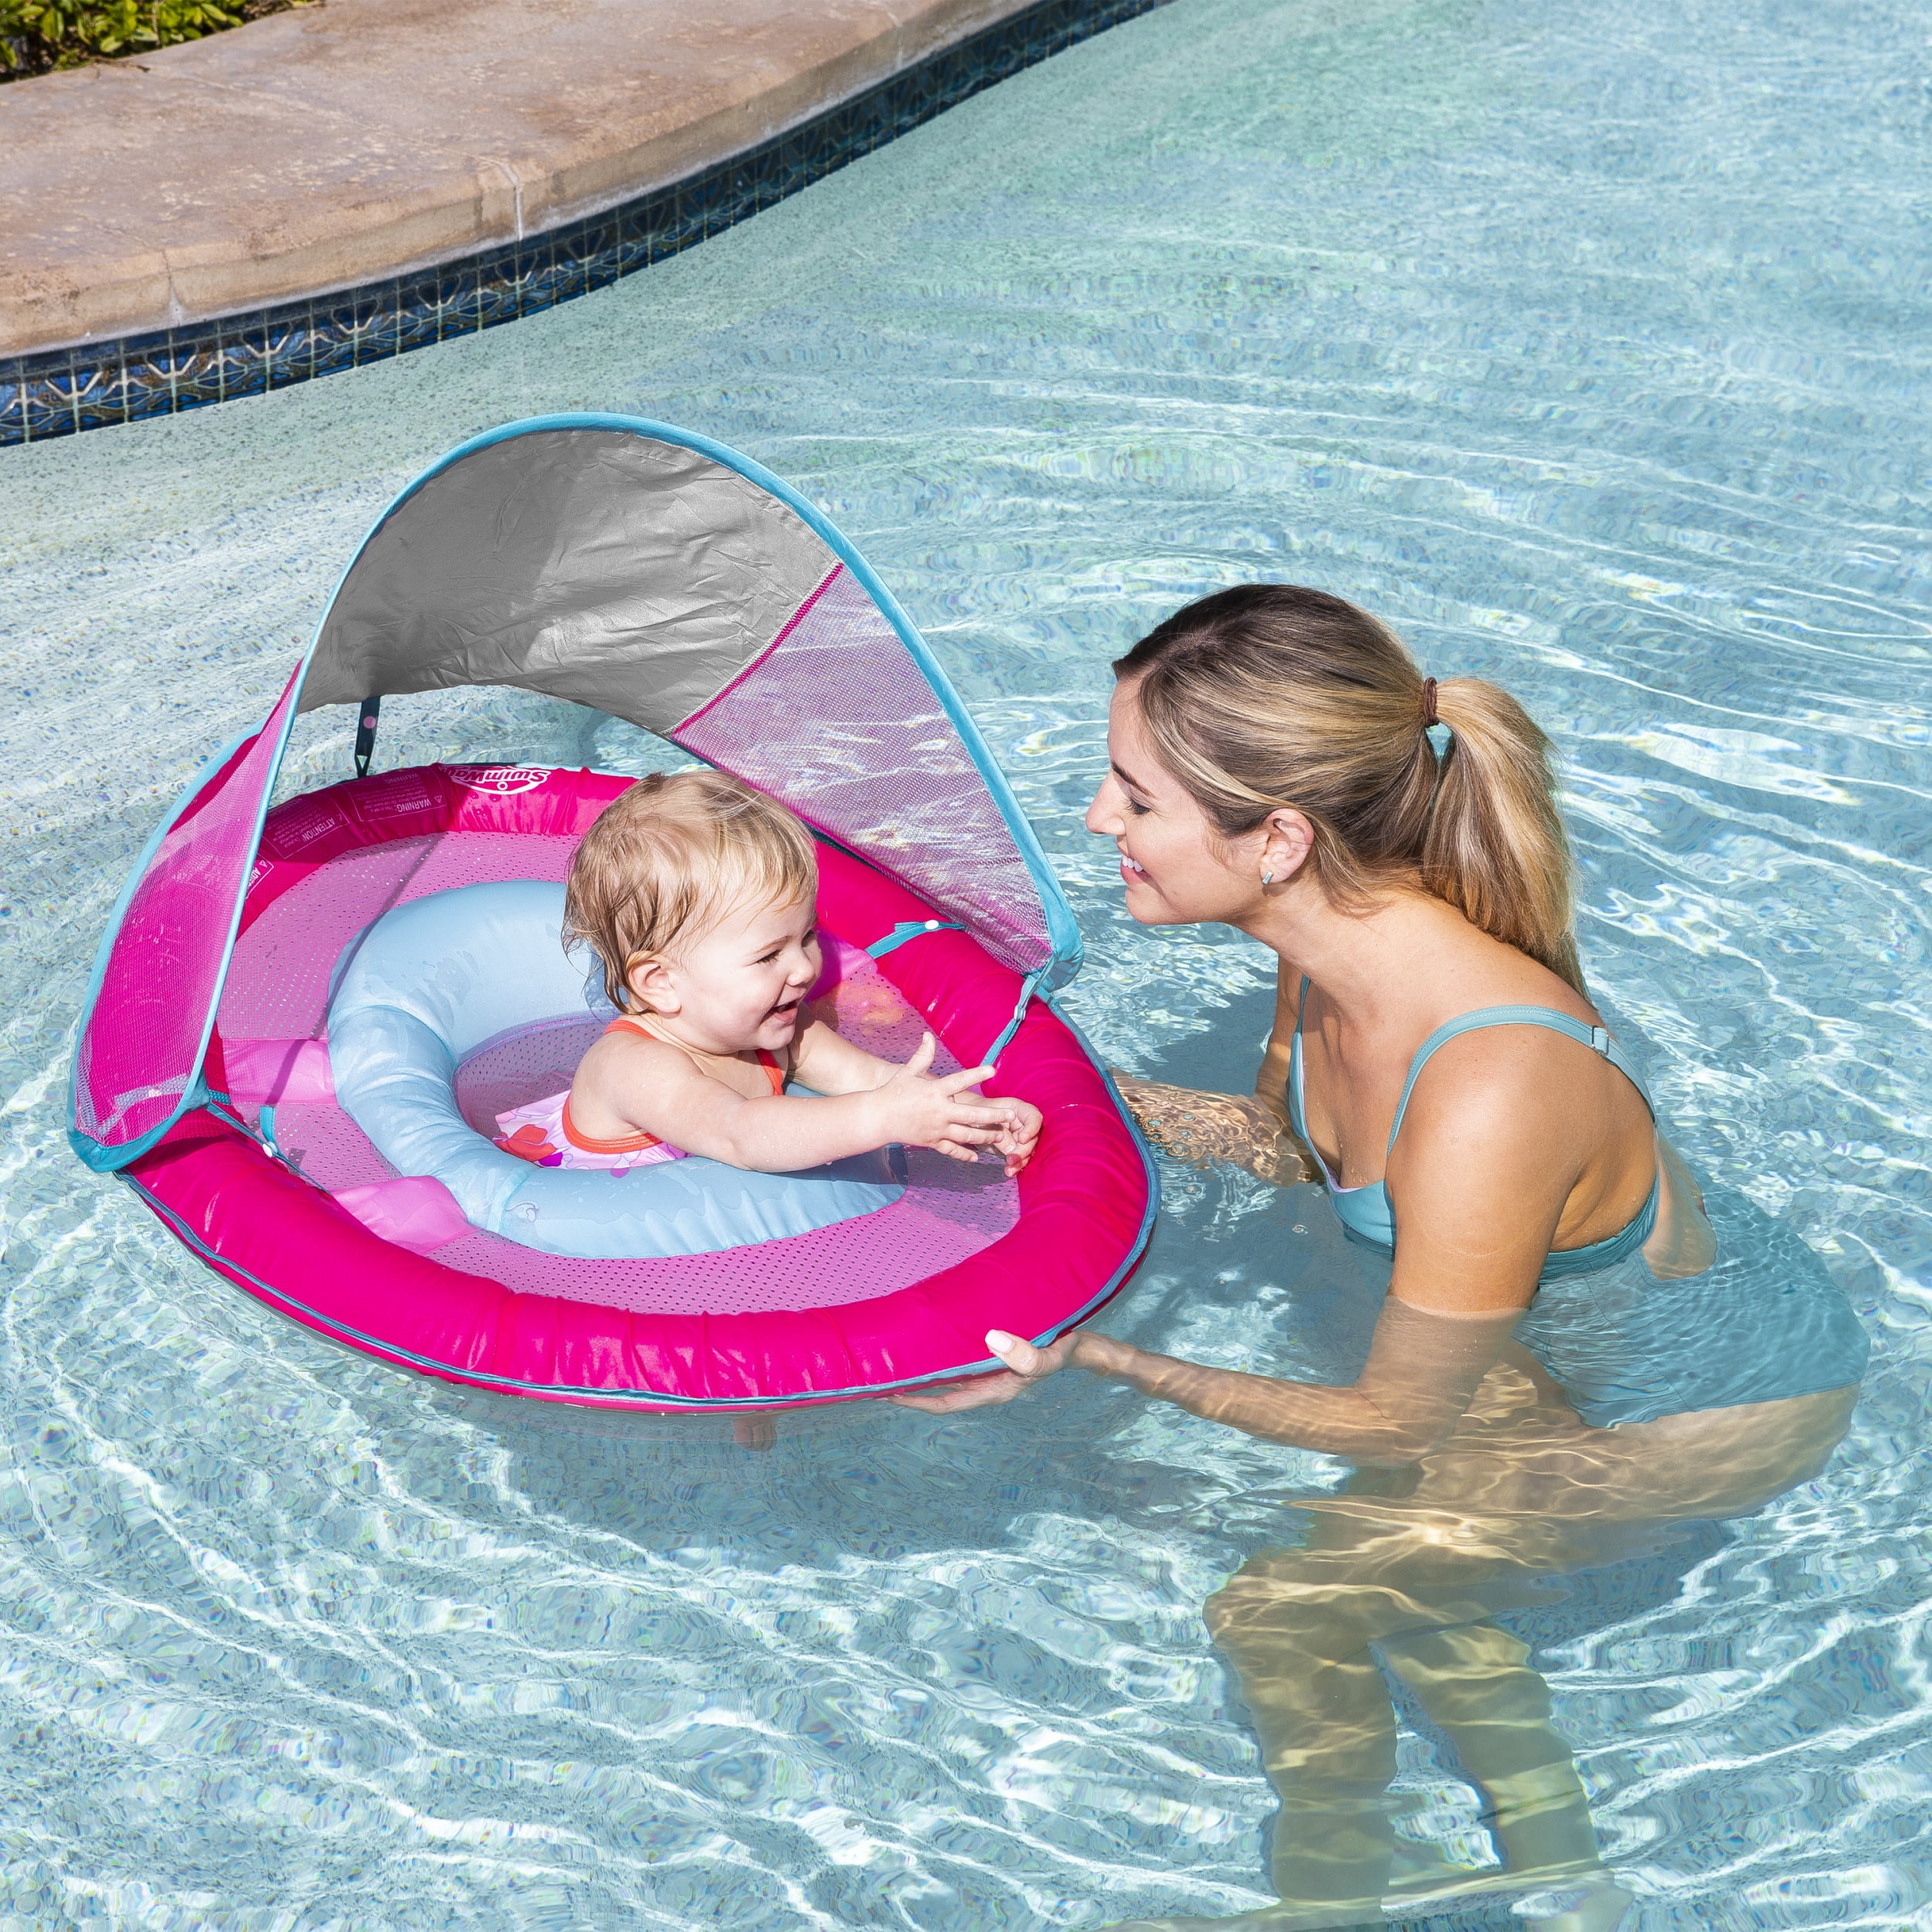 Toddler Baby Kids Swimming Pool Inflatable Swim Circle Float Seat with Canopy UK 